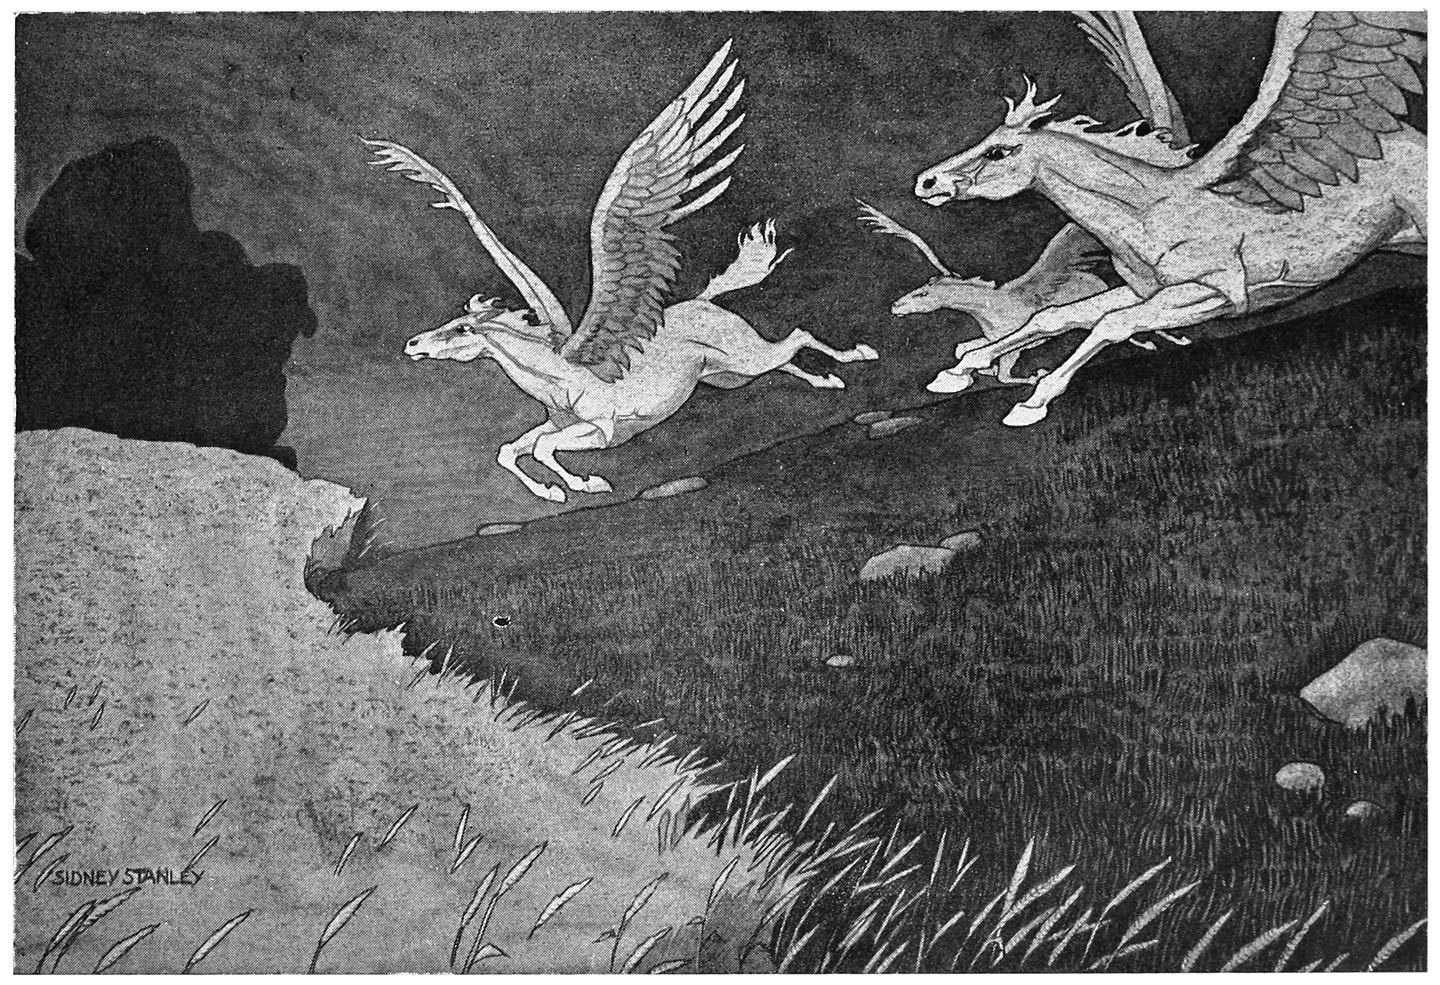 “Three winged horses came into the field.”